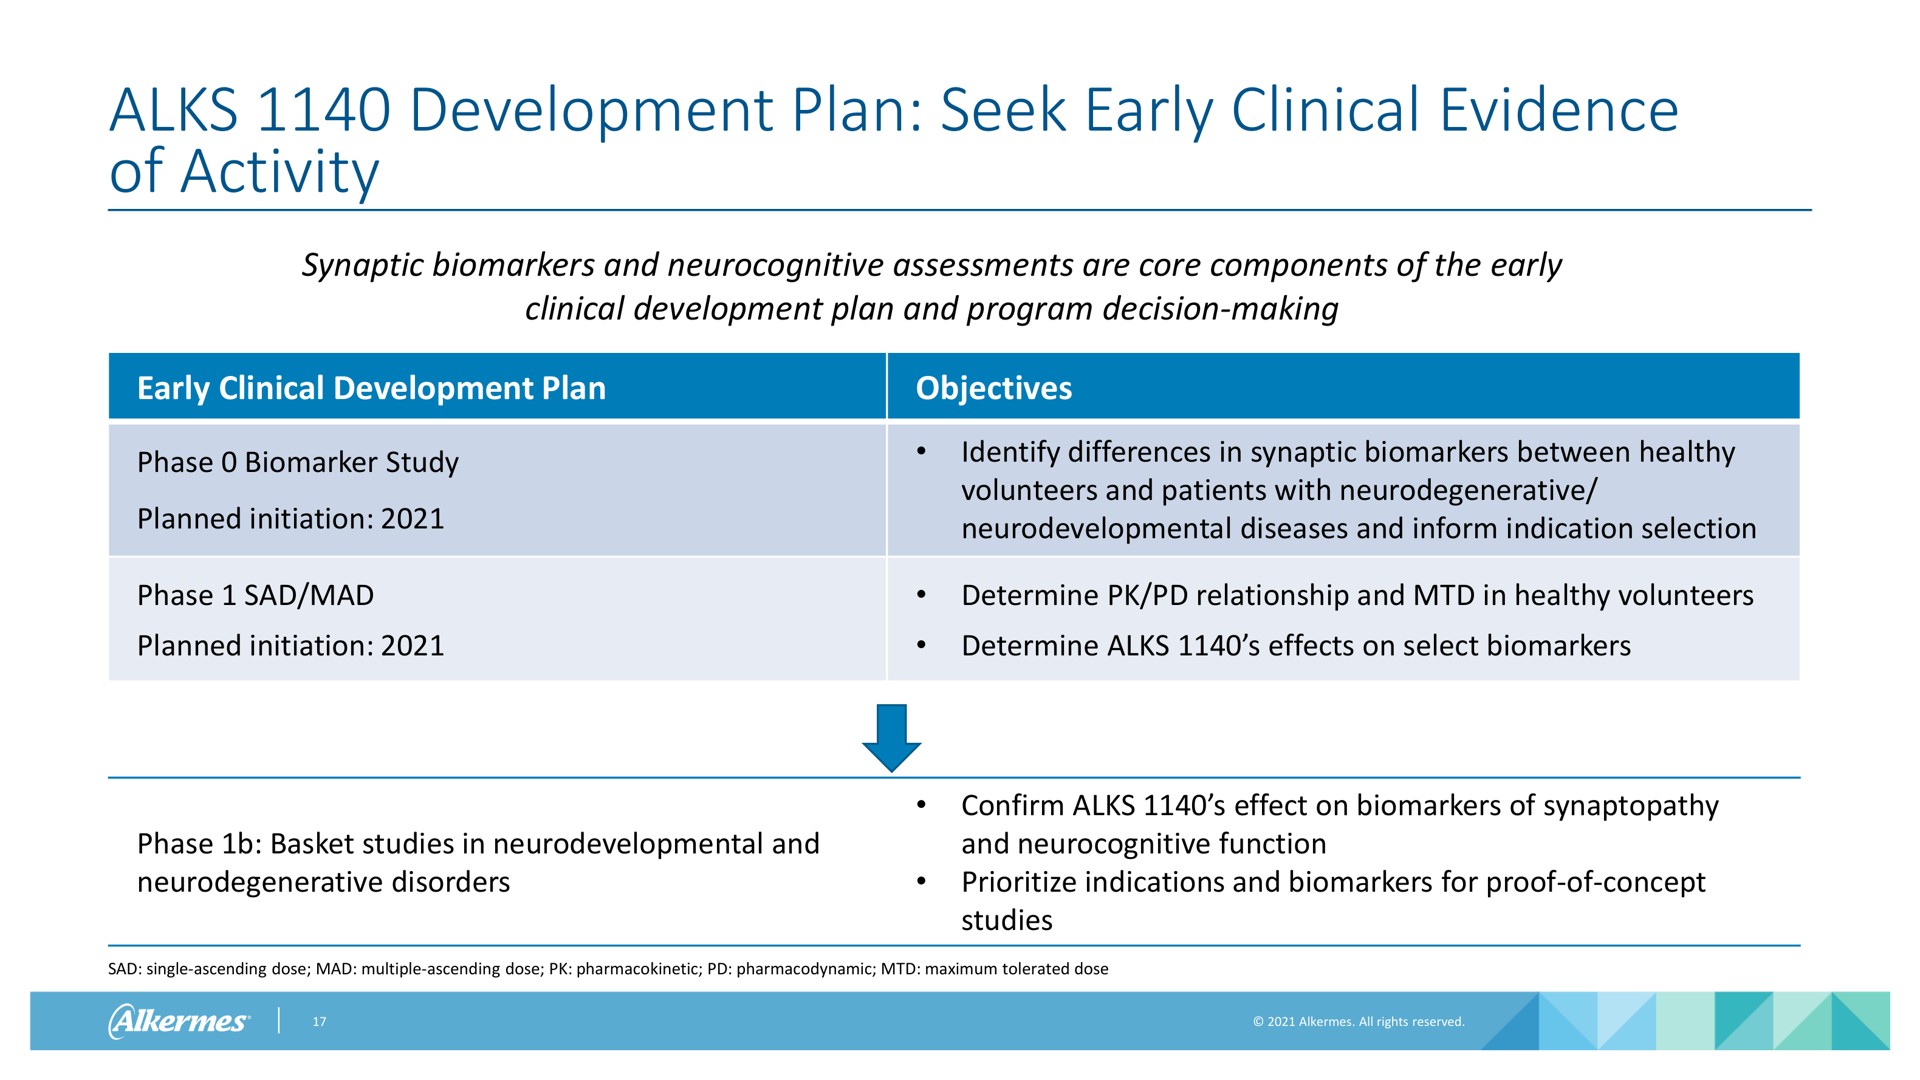 development plan seek early clinical evidence of activity synaptic and assessments are core components of the early clinical development plan and program decision making early clinical development plan objectives phase study planned initiation phase sad mad planned initiation identify differences in synaptic between healthy volunteers and patients with neurodegenerative diseases and inform indication selection determine relationship and in healthy volunteers determine effects on select phase basket studies in and neurodegenerative disorders confirm effect on of and function indications and for proof of concept studies sad single ascending dose mad multiple ascending dose pharmacodynamic maximum tolerated dose | Alkermes